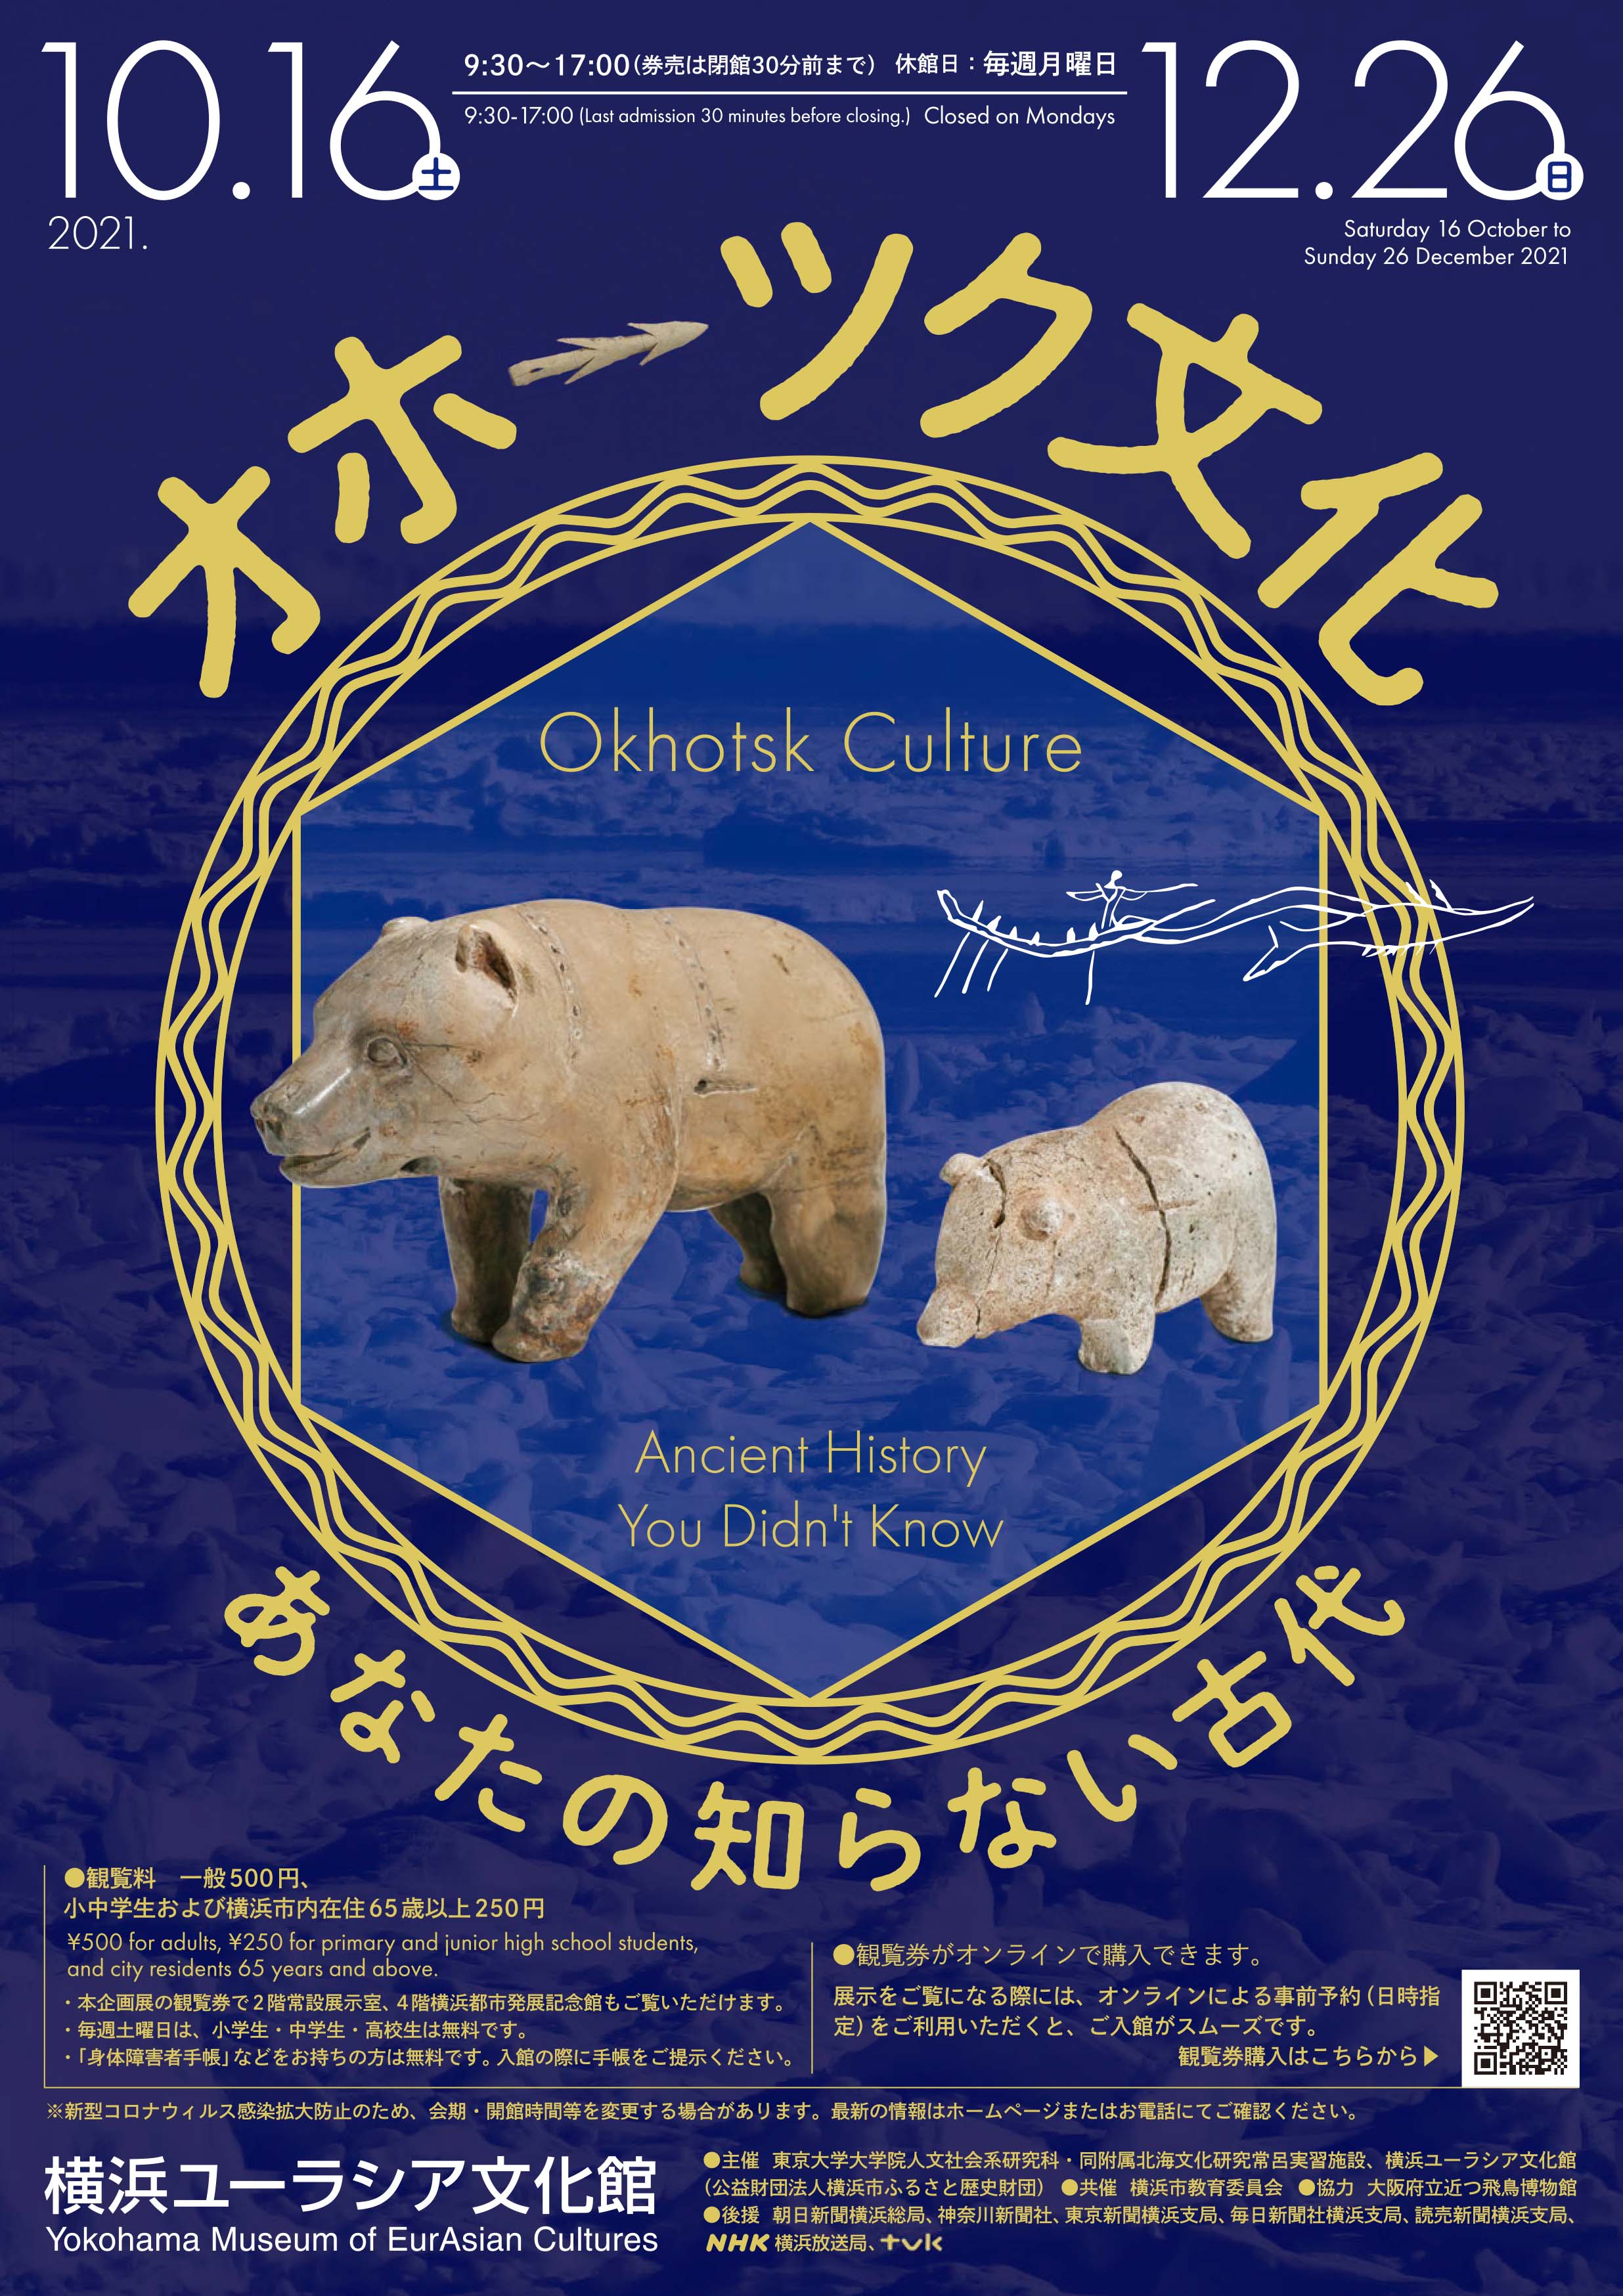 Special exhibition in collaboration with the Graduate School of Humanities and Sociology and the host museum “Okhotsk Culture: Ancient History You Didn’t Know” Oct. 2021 – Mar. 2022 Yokohama Museum of EurAsian Cultures, Osaka Pref. Chikatsuasuka Museum